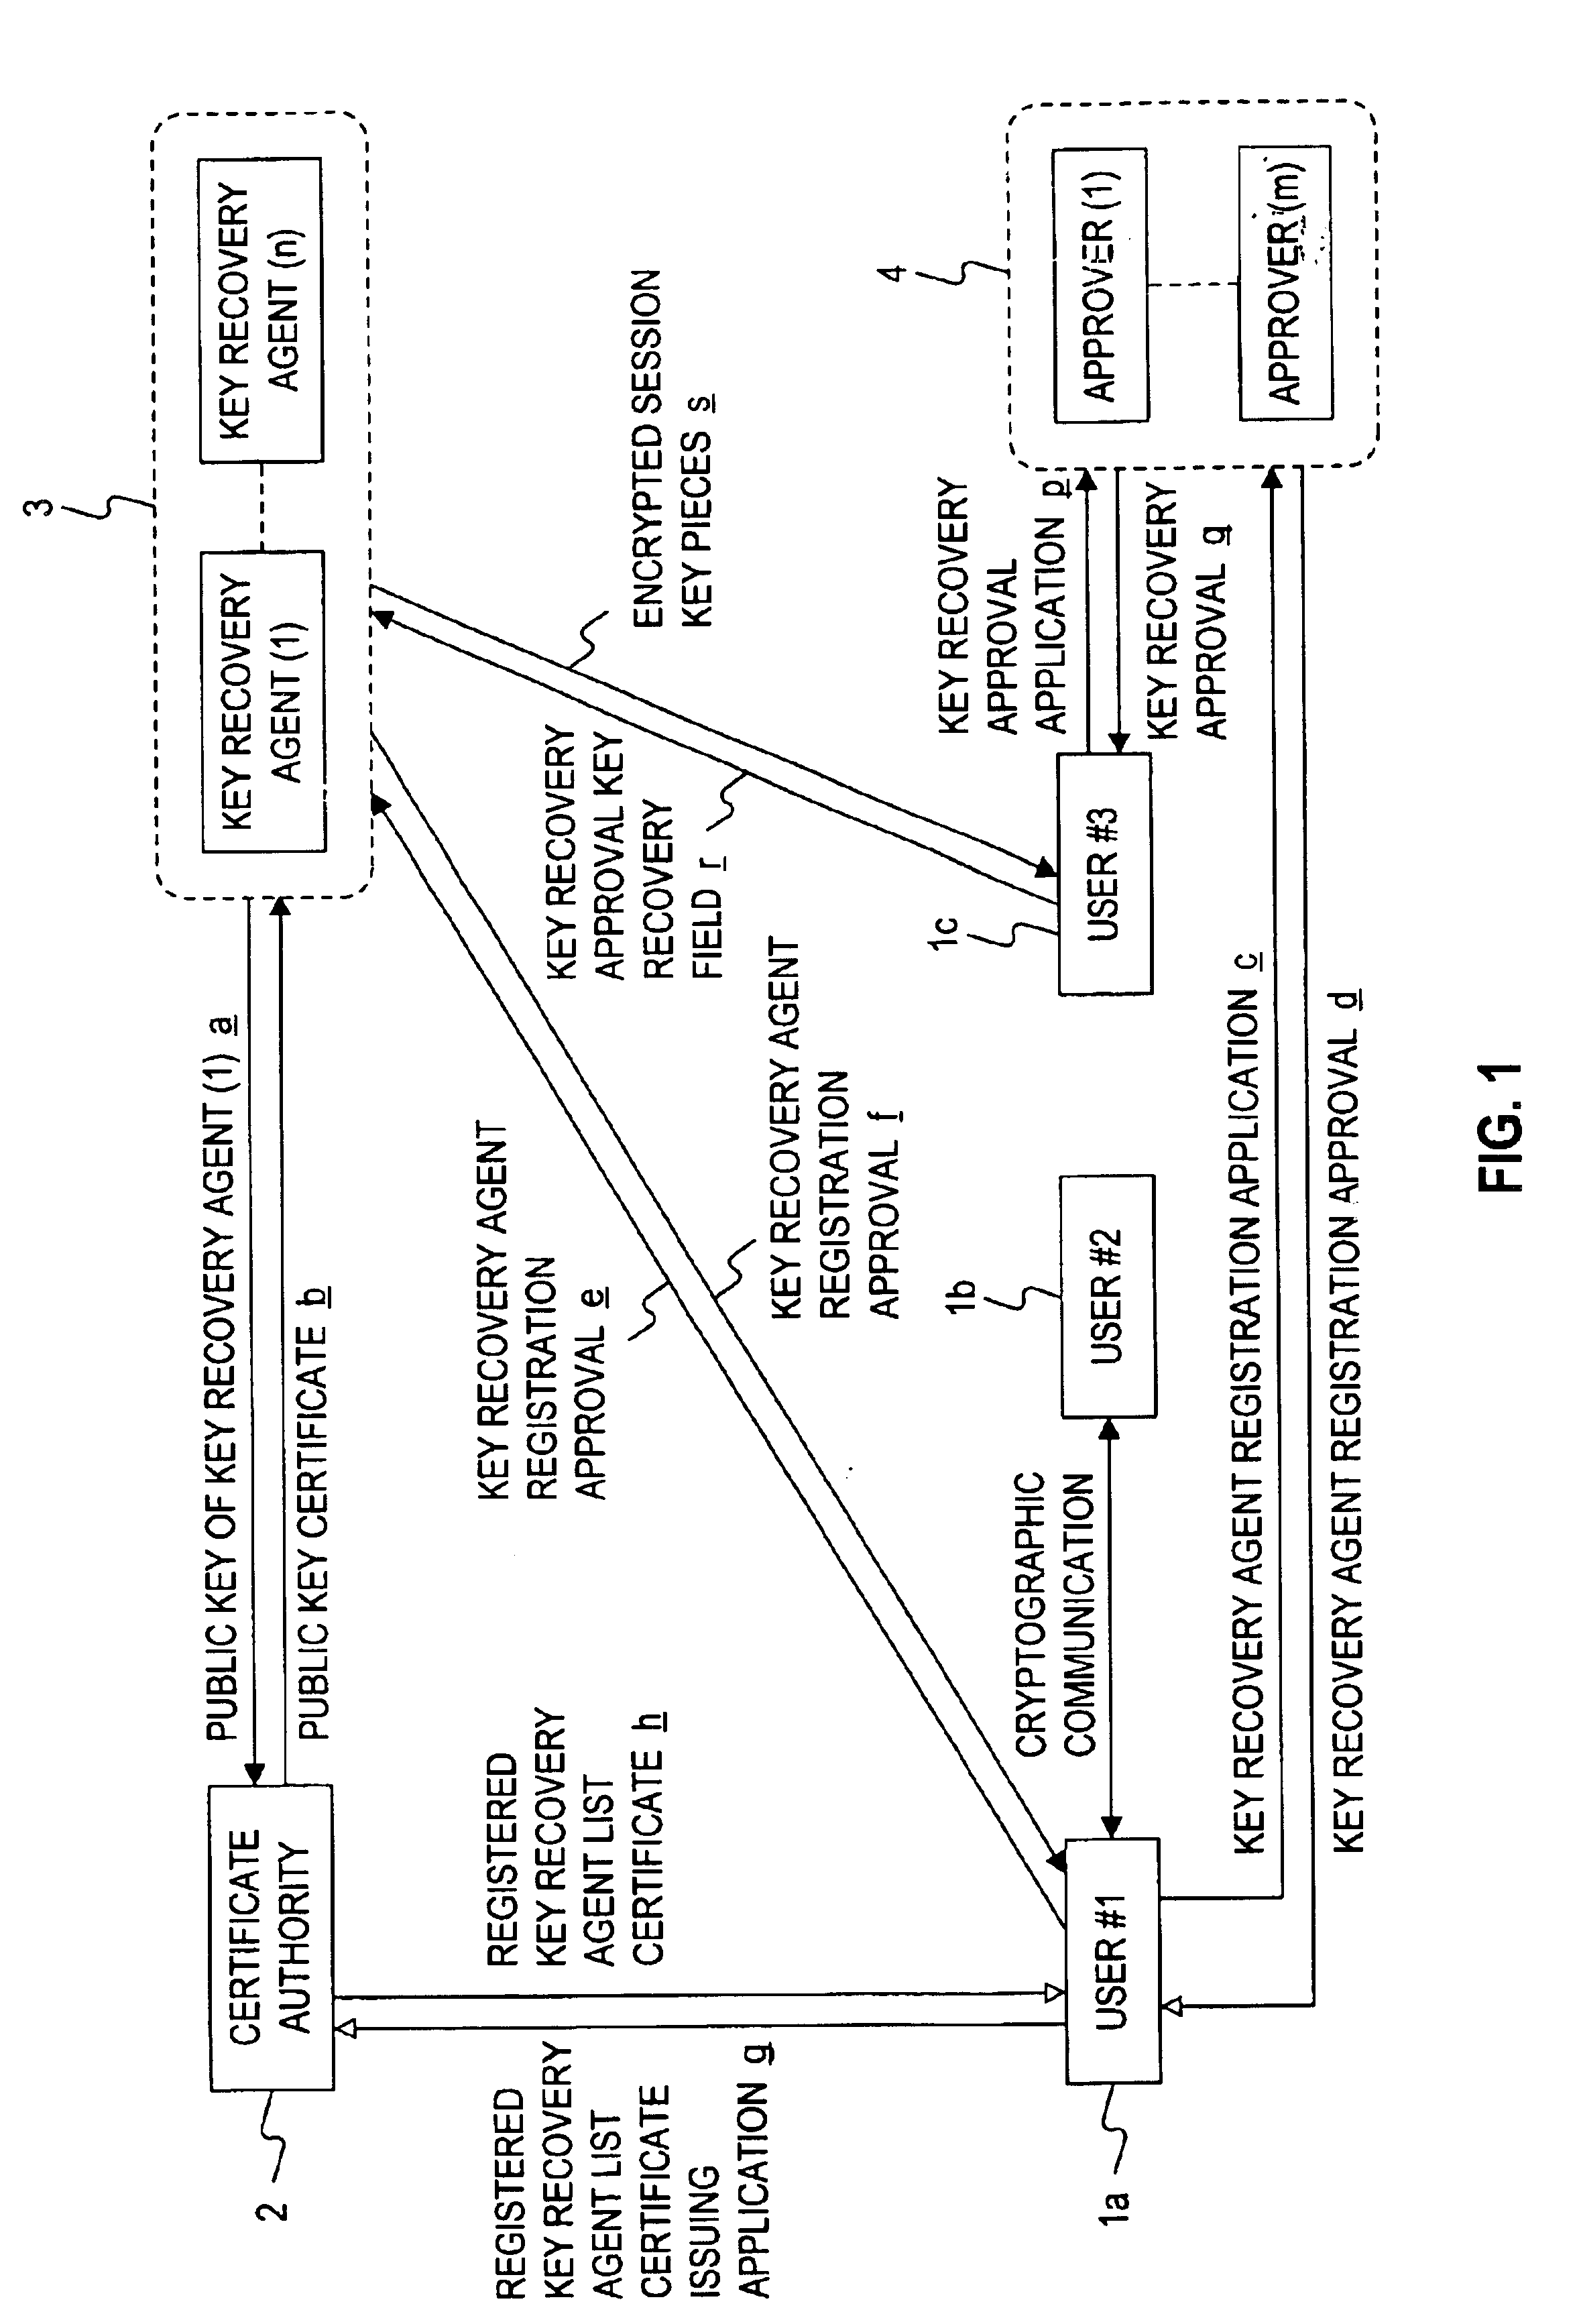 Encryption apparatus, cryptographic communication system, key recovery system, and storage medium